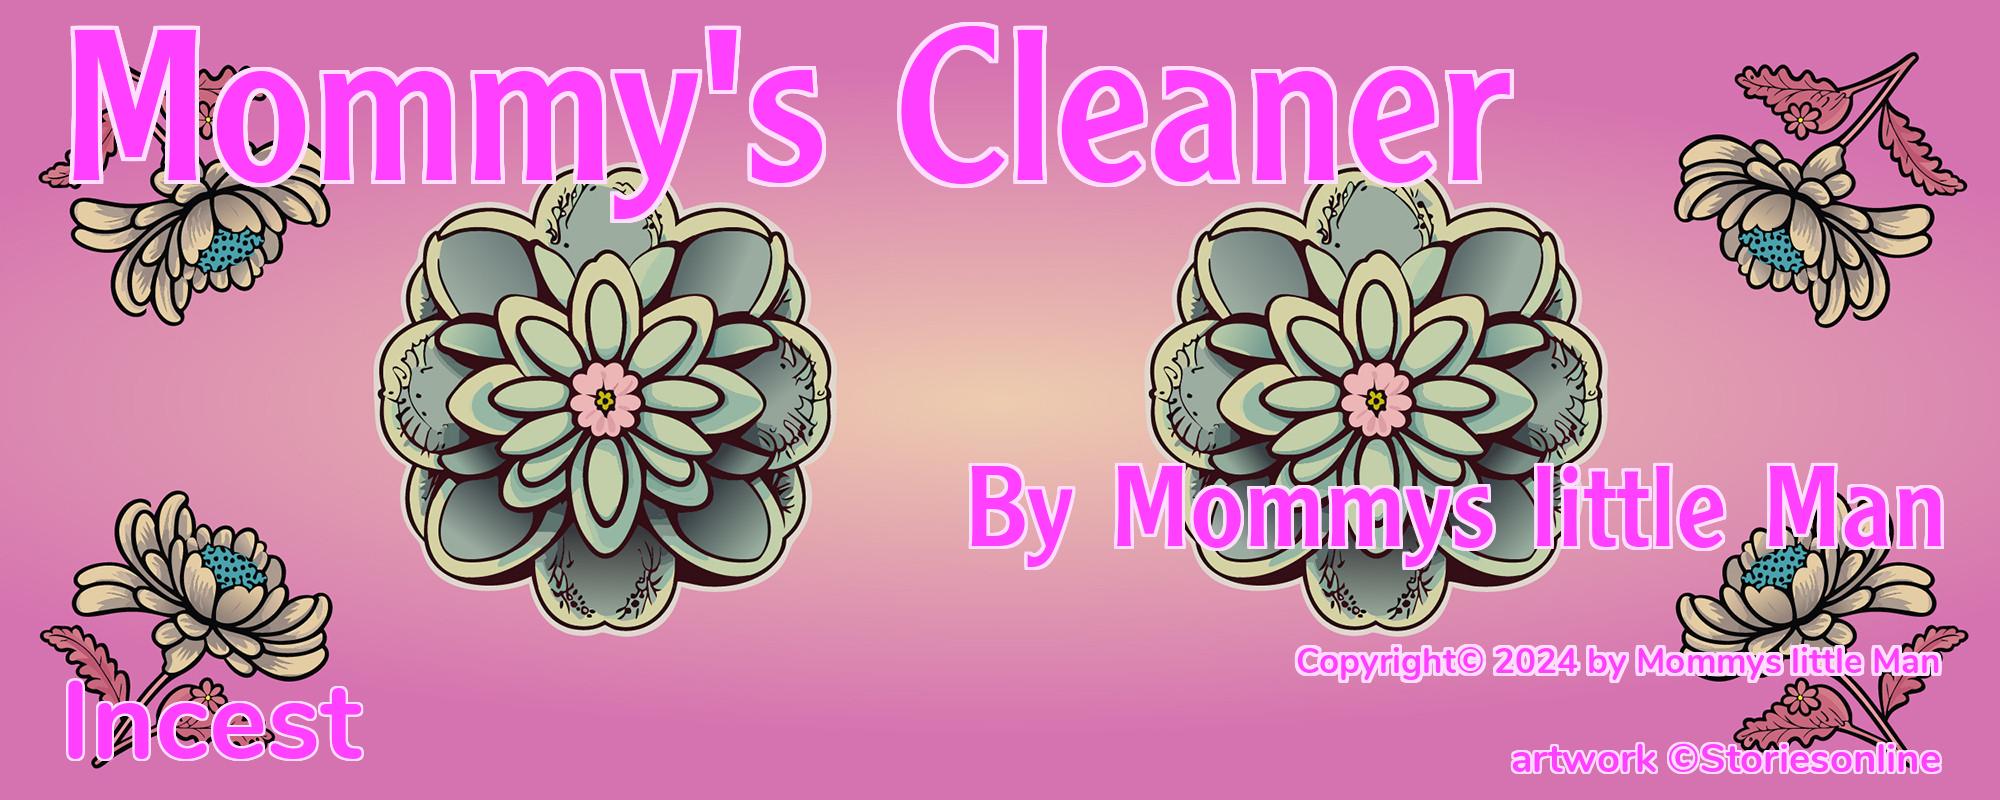 Mommy's Cleaner - Cover